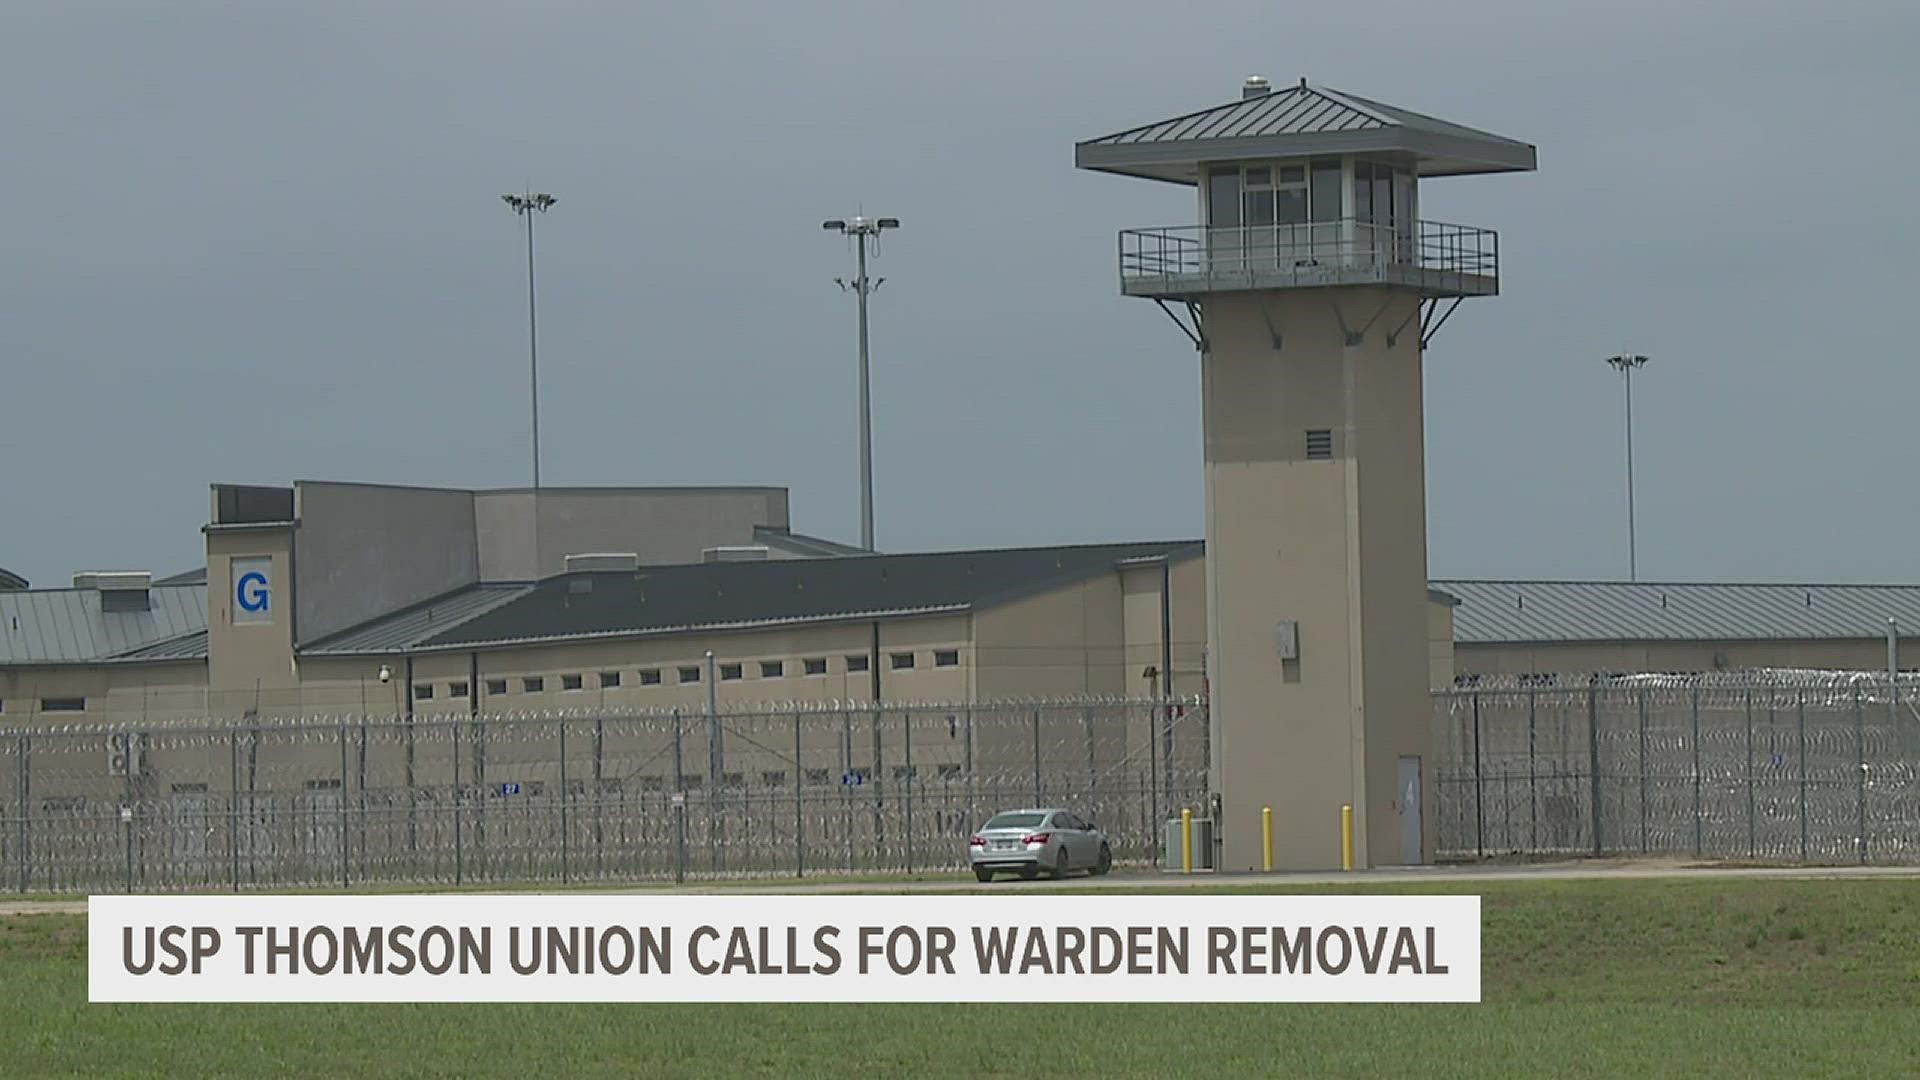 In a letter to the U.S. deputy attorney general, the prison's union says Warden Thomas Bergami's leadership has placed inmates, staff and communities at risk.